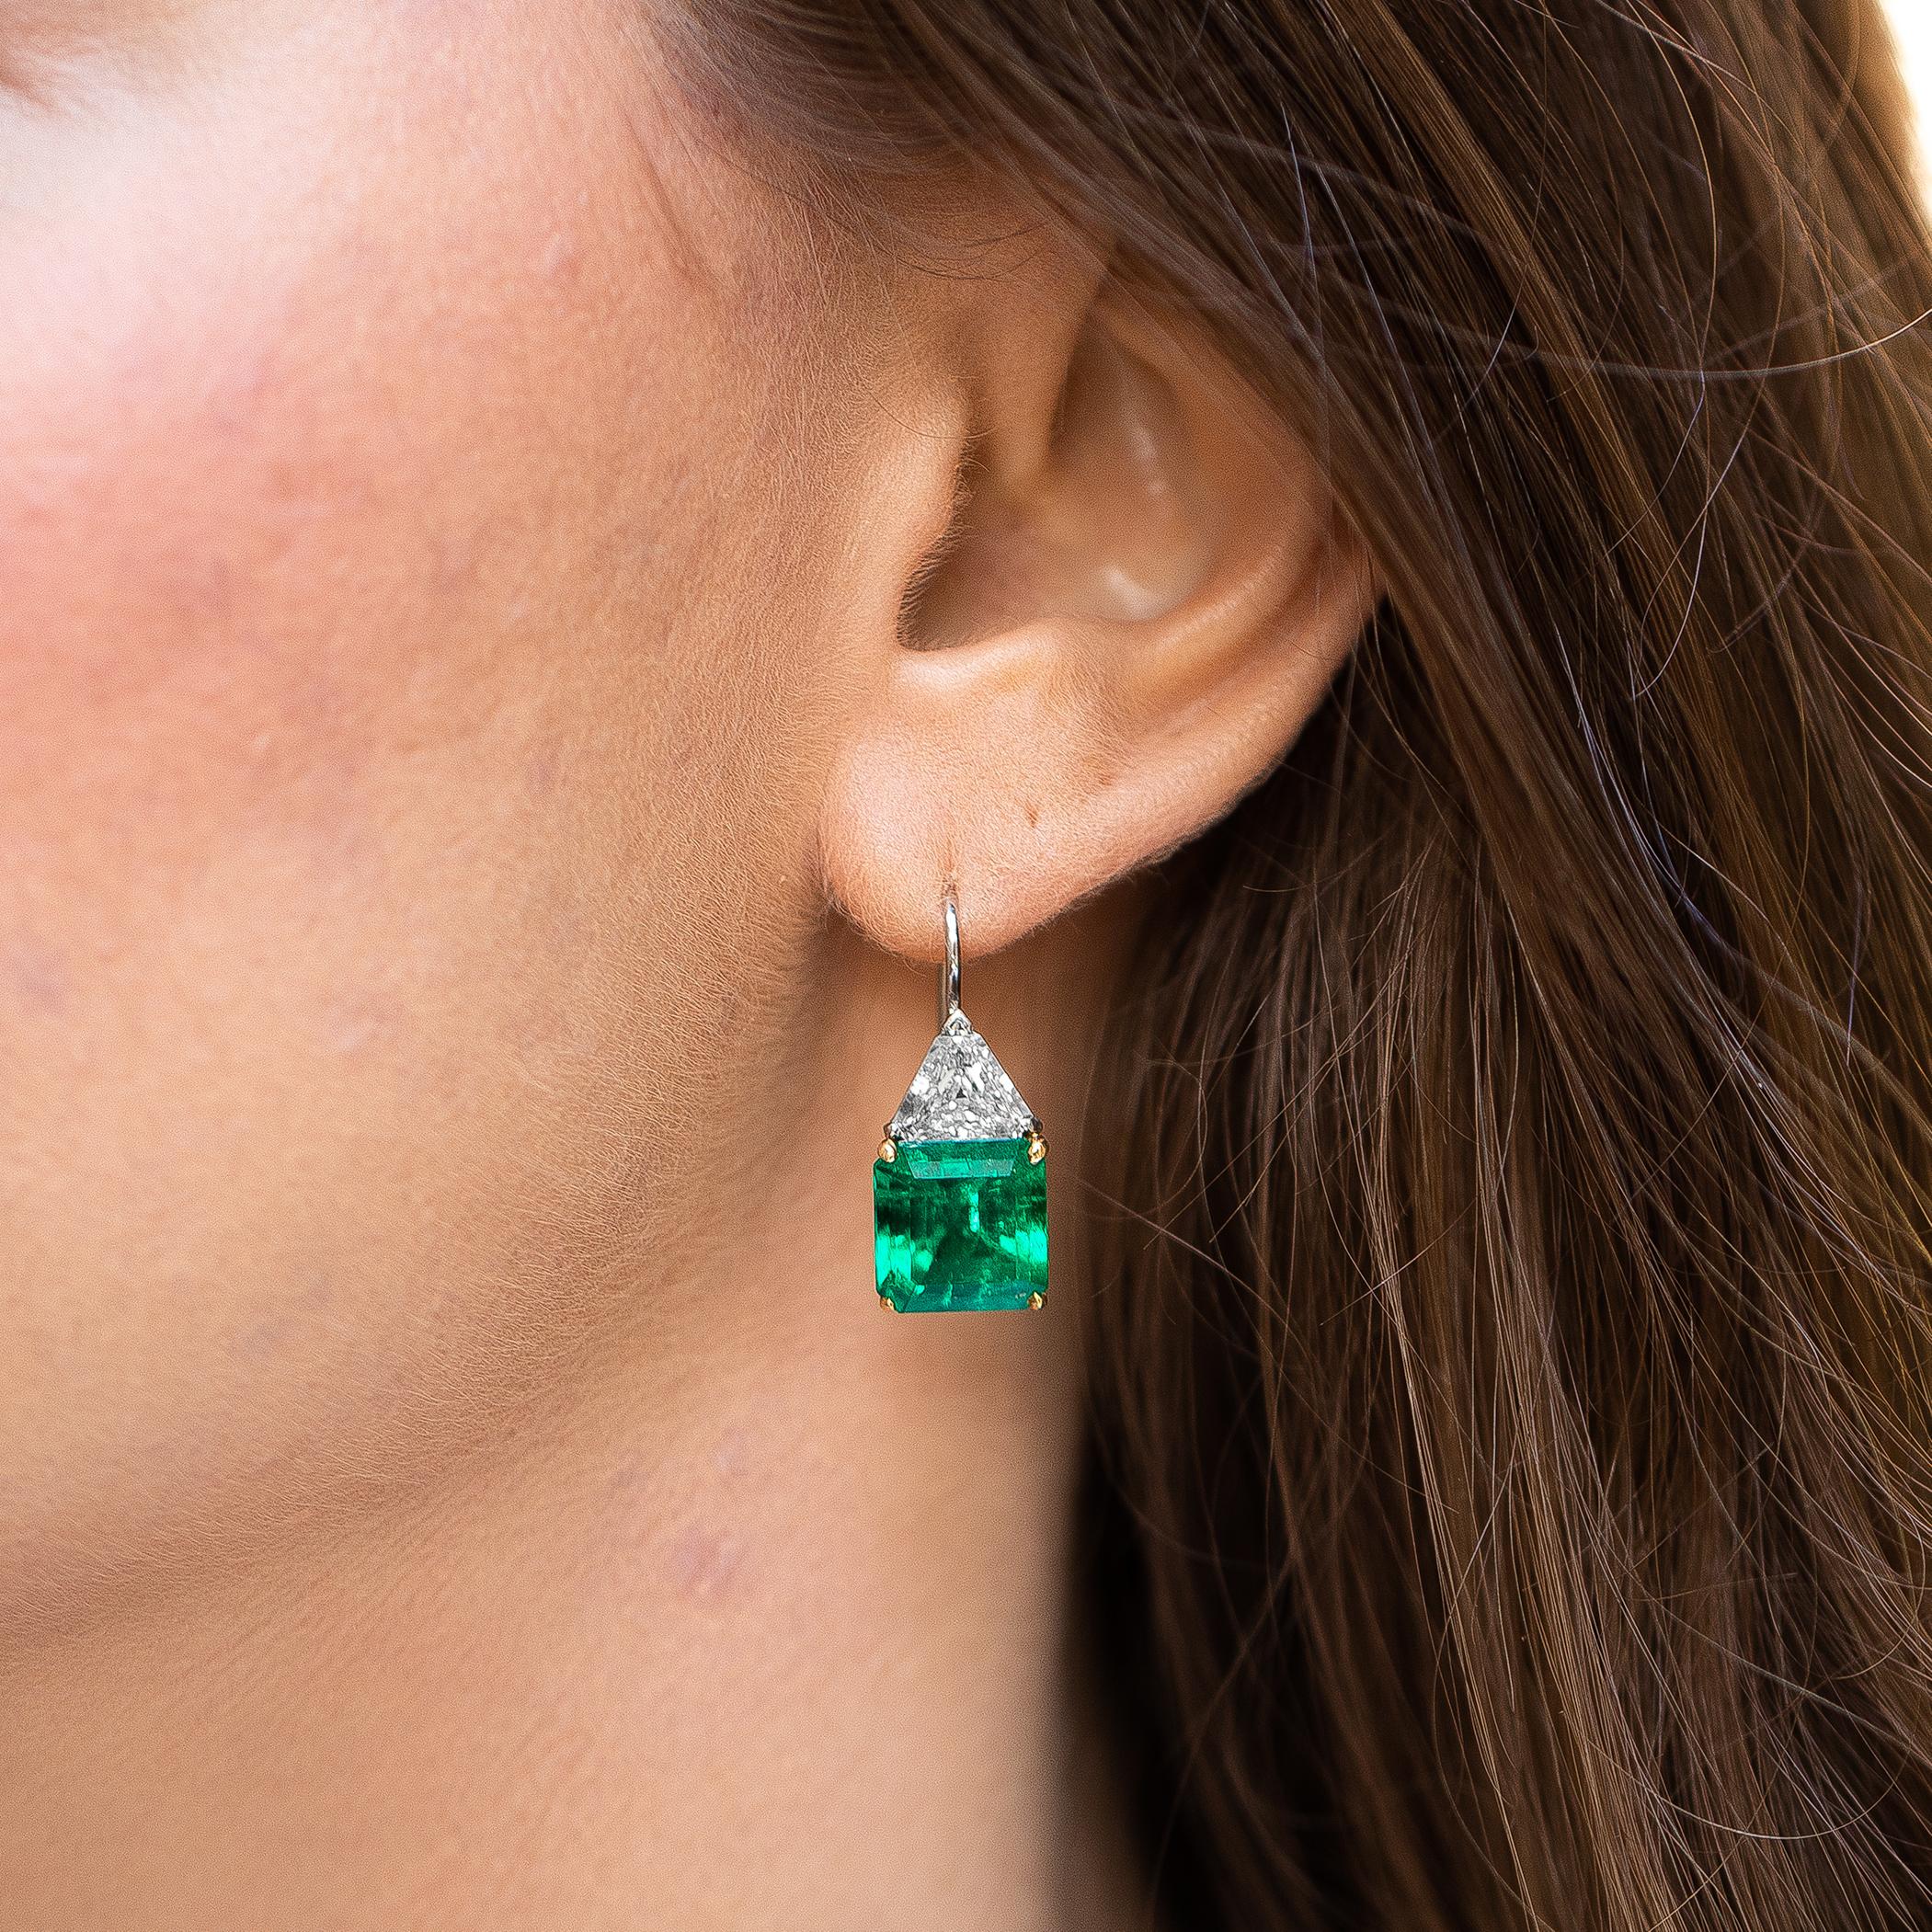 Stunning Asscher Emeralds and Trillion cut diamonds make these earrings the perfect balance of class and luxury. 
Very Fine AGL Certified Emeralds = 5.75 Carat + 5.53 Carat
2 Diamonds = 3 Carats
( Color: E, Clarity: VS )
Metal: Platinum & 18K Yellow